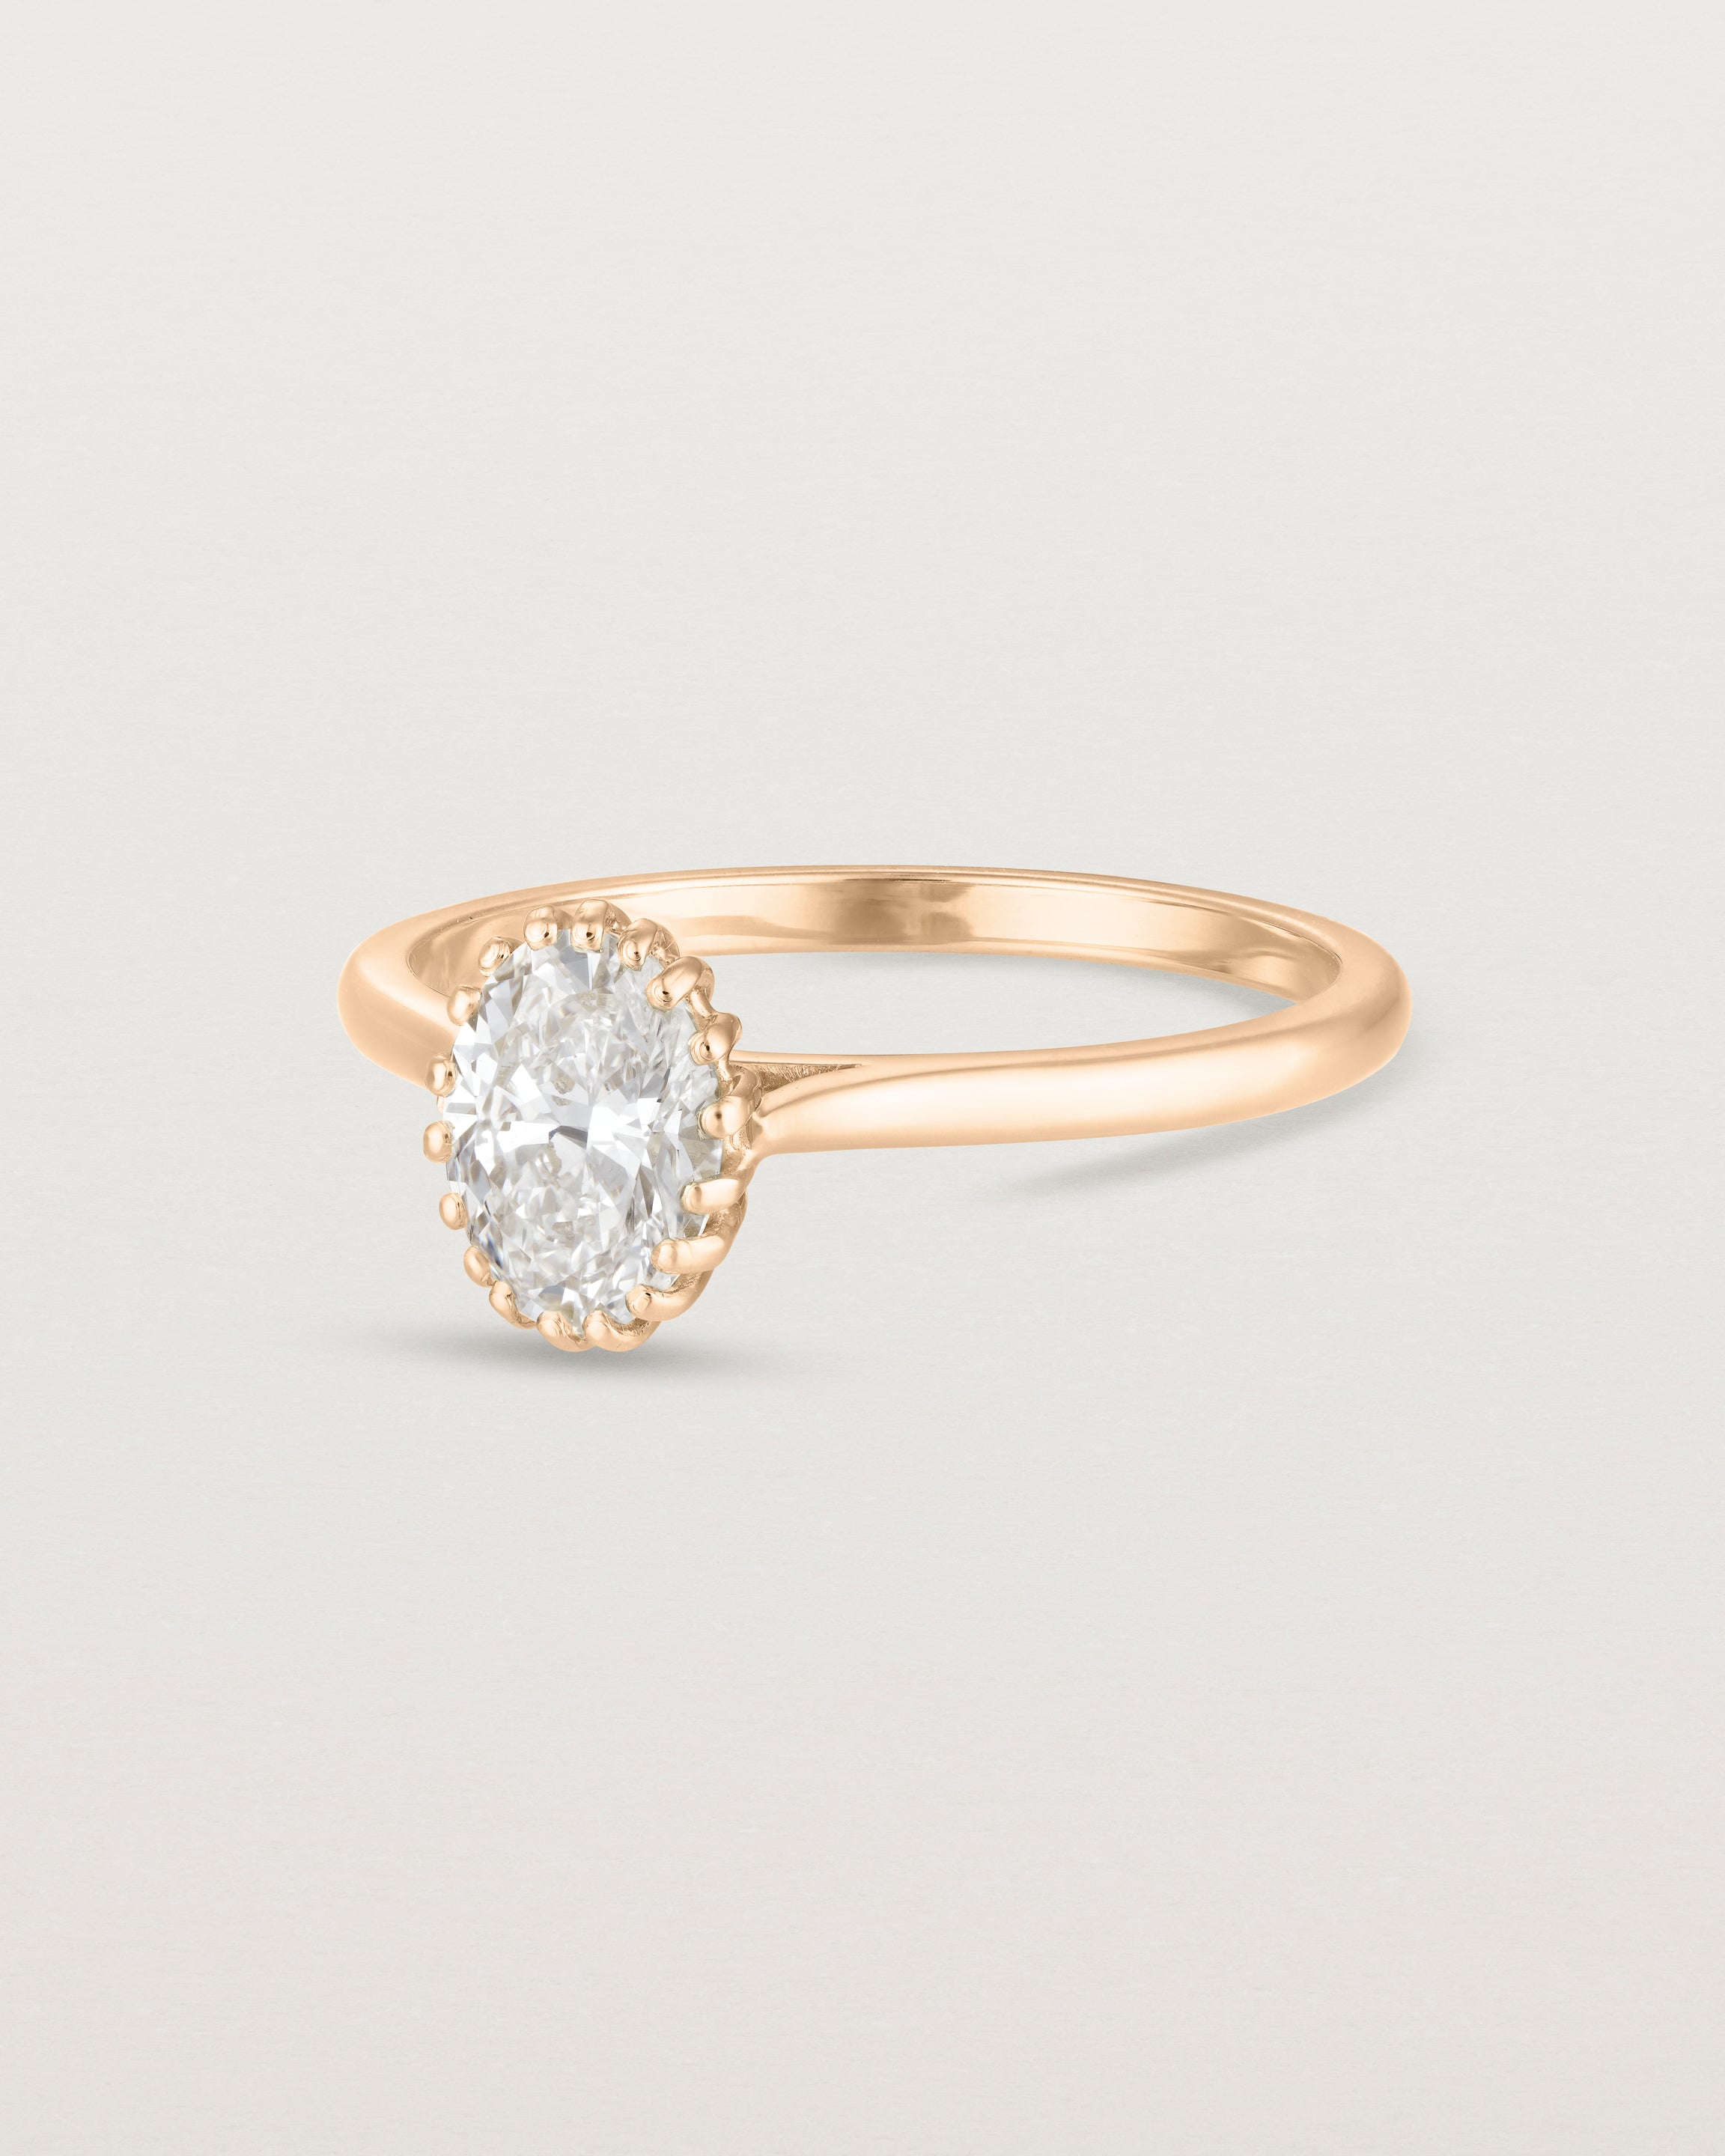 Angled view of the Meroë Oval Solitaire | Laboratory Grown Diamond in rose gold.